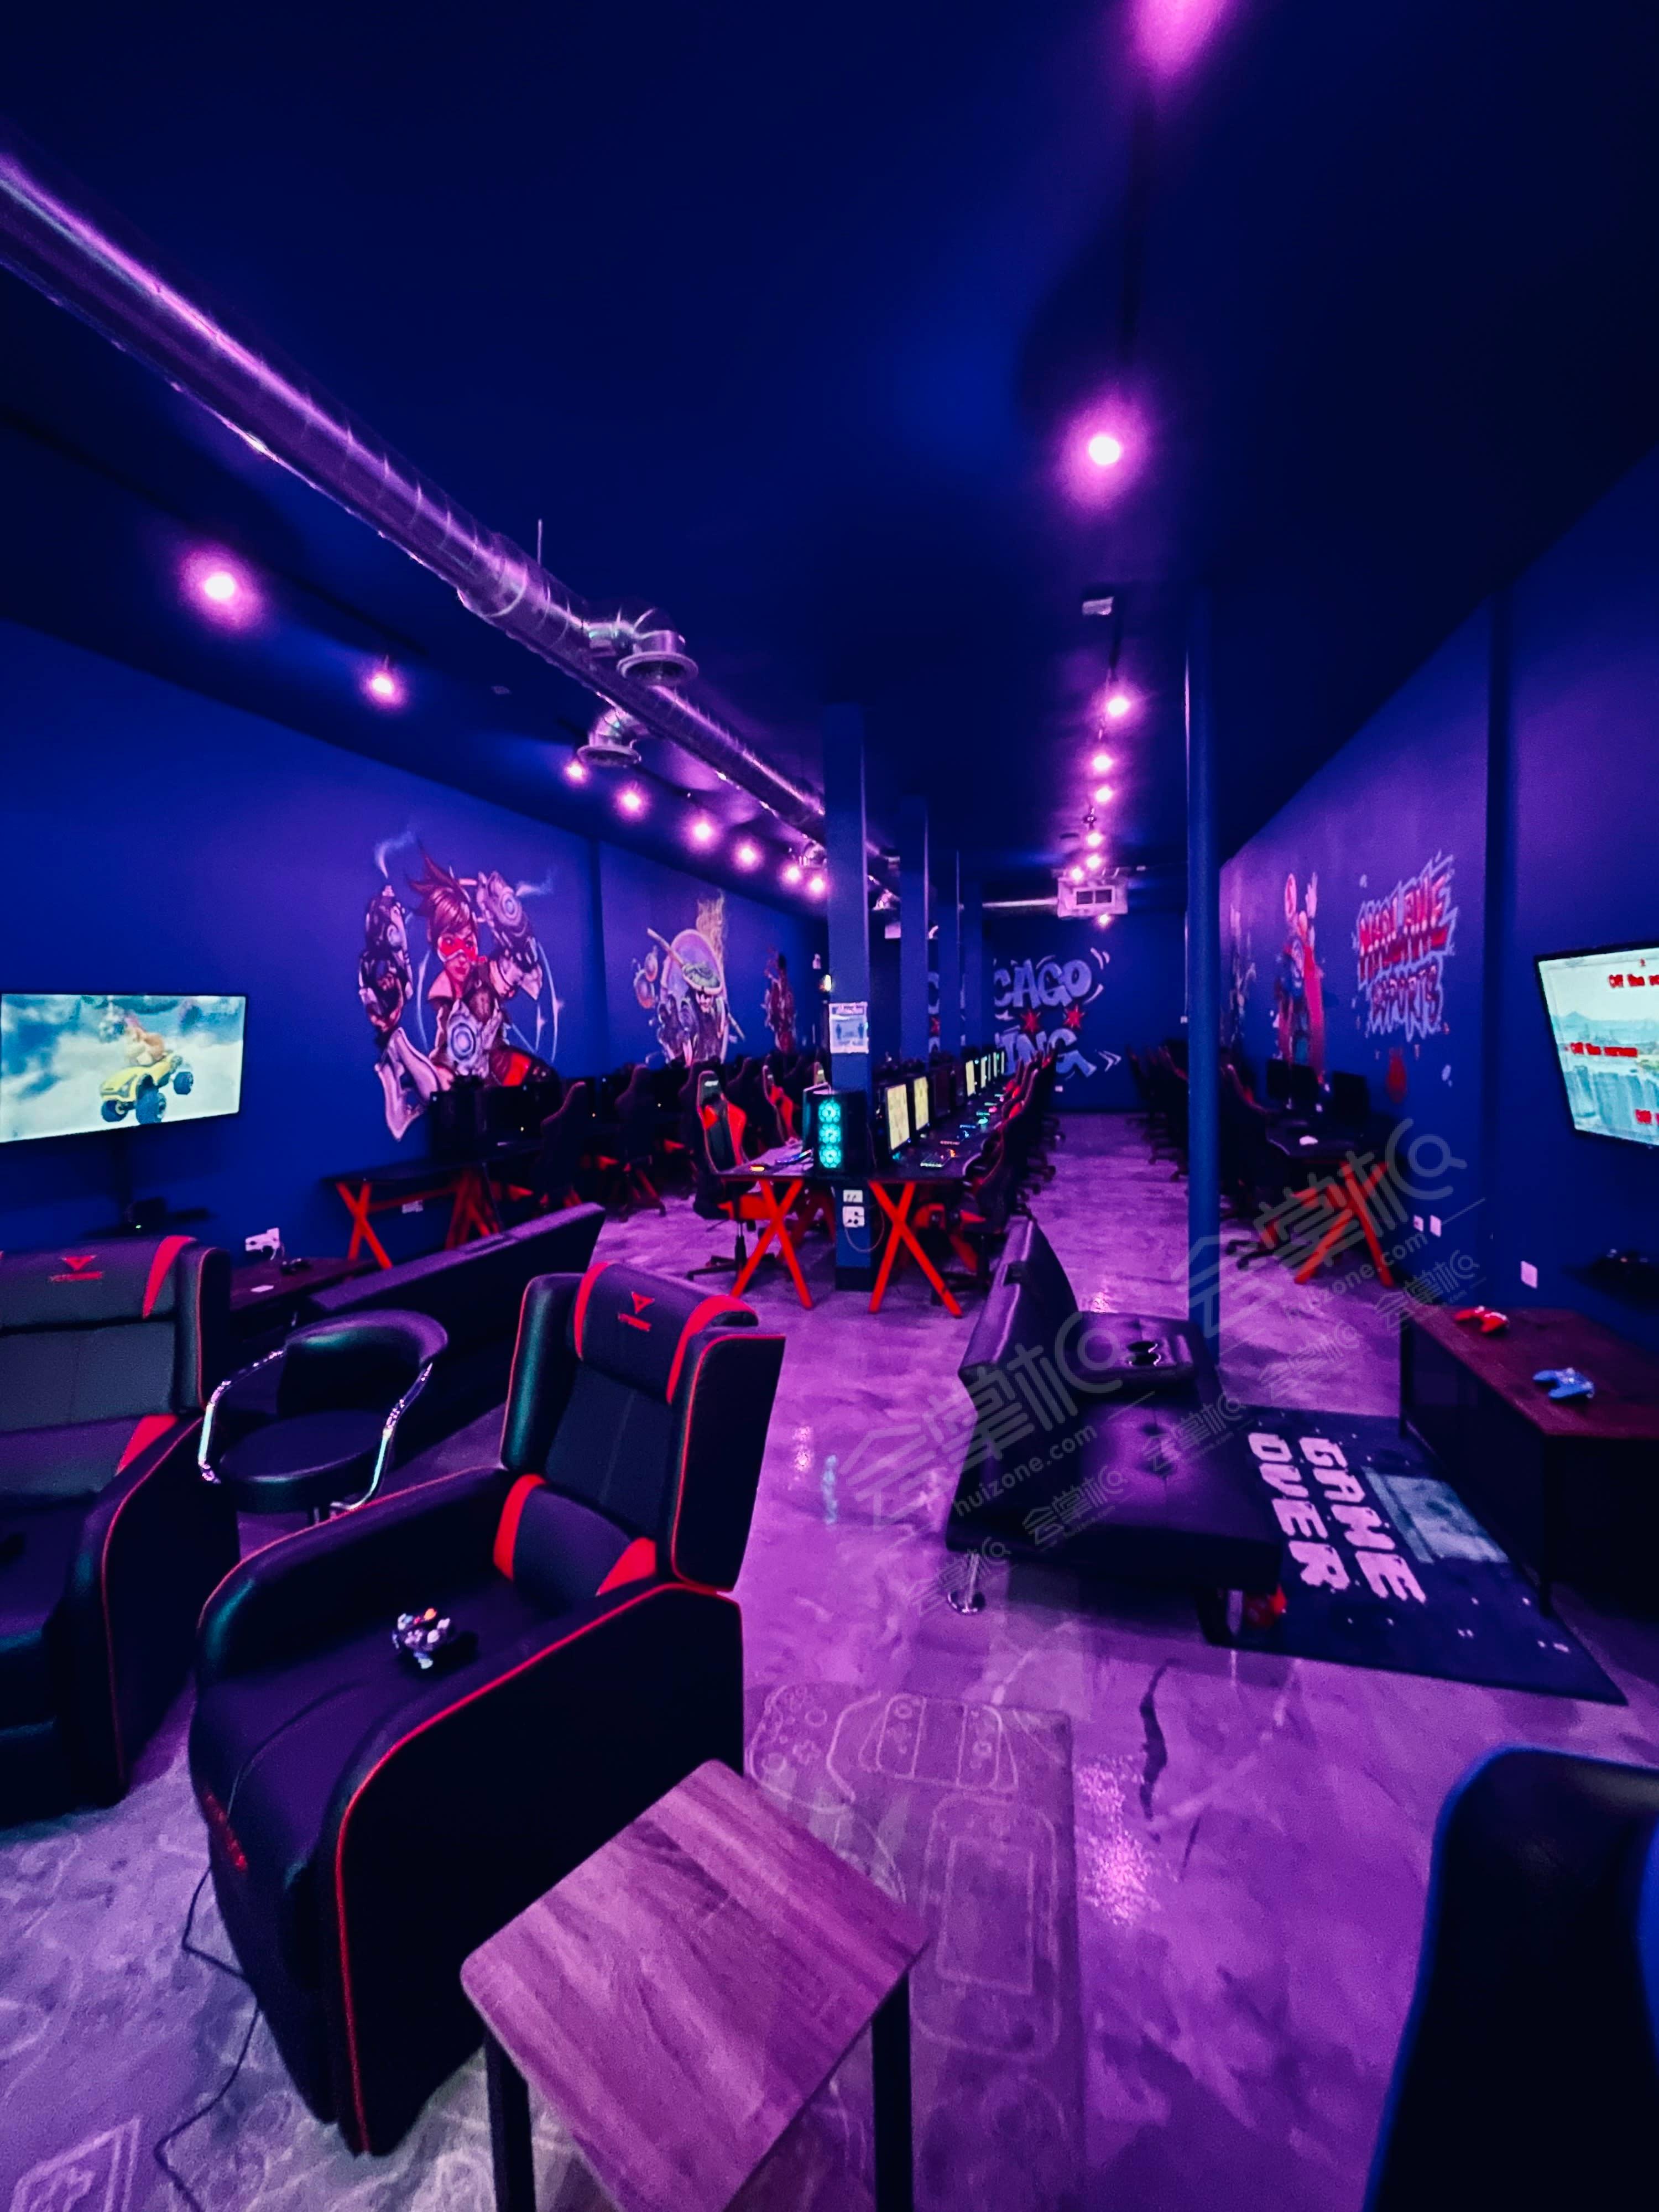 Gaming Lounge with bar